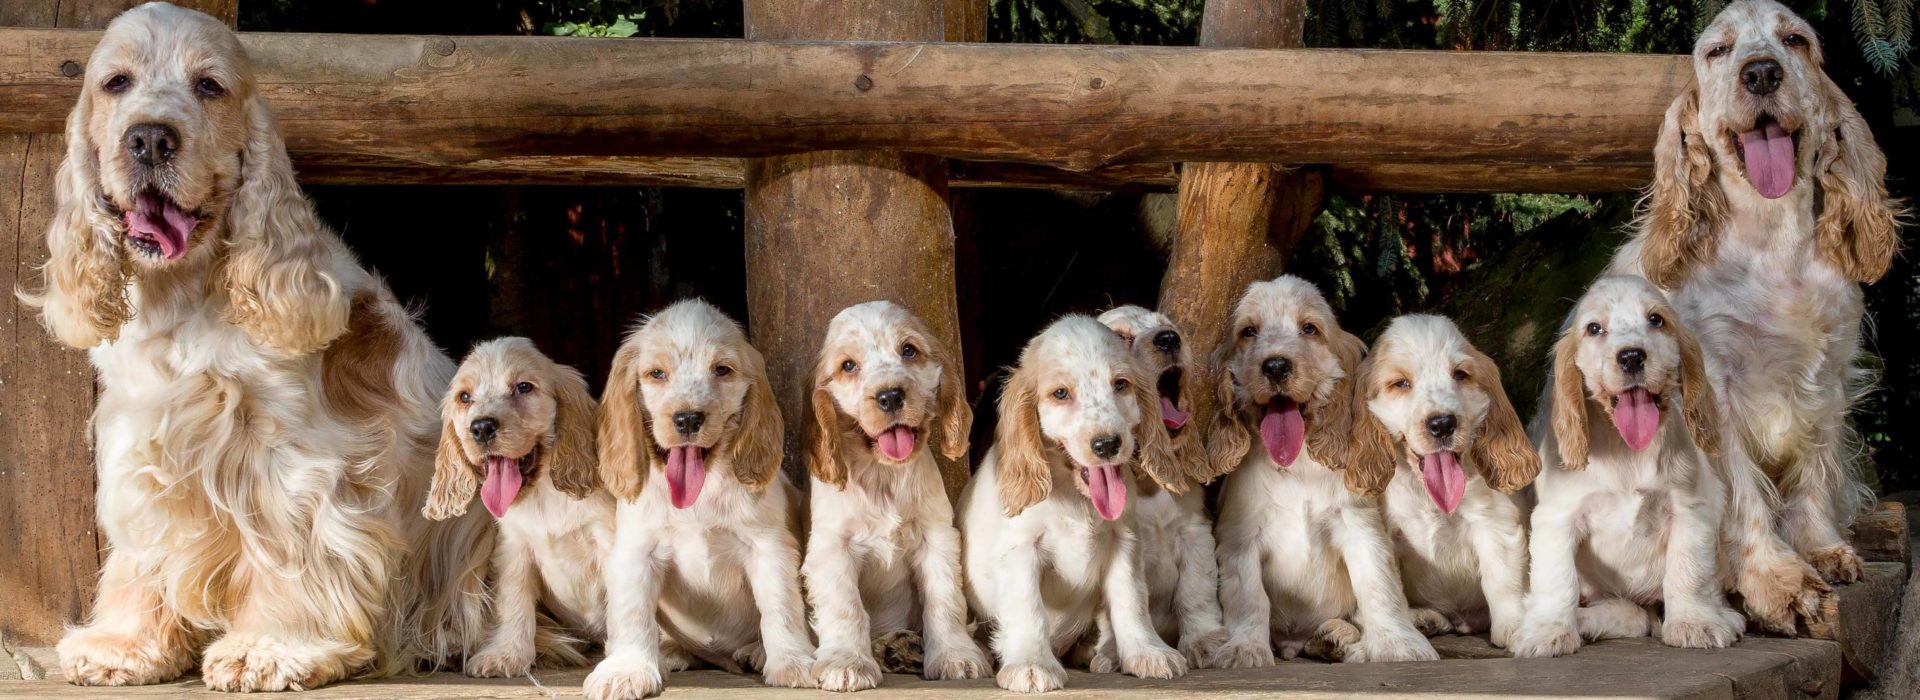 Two dogs and puppies sitting in a line on a log bench